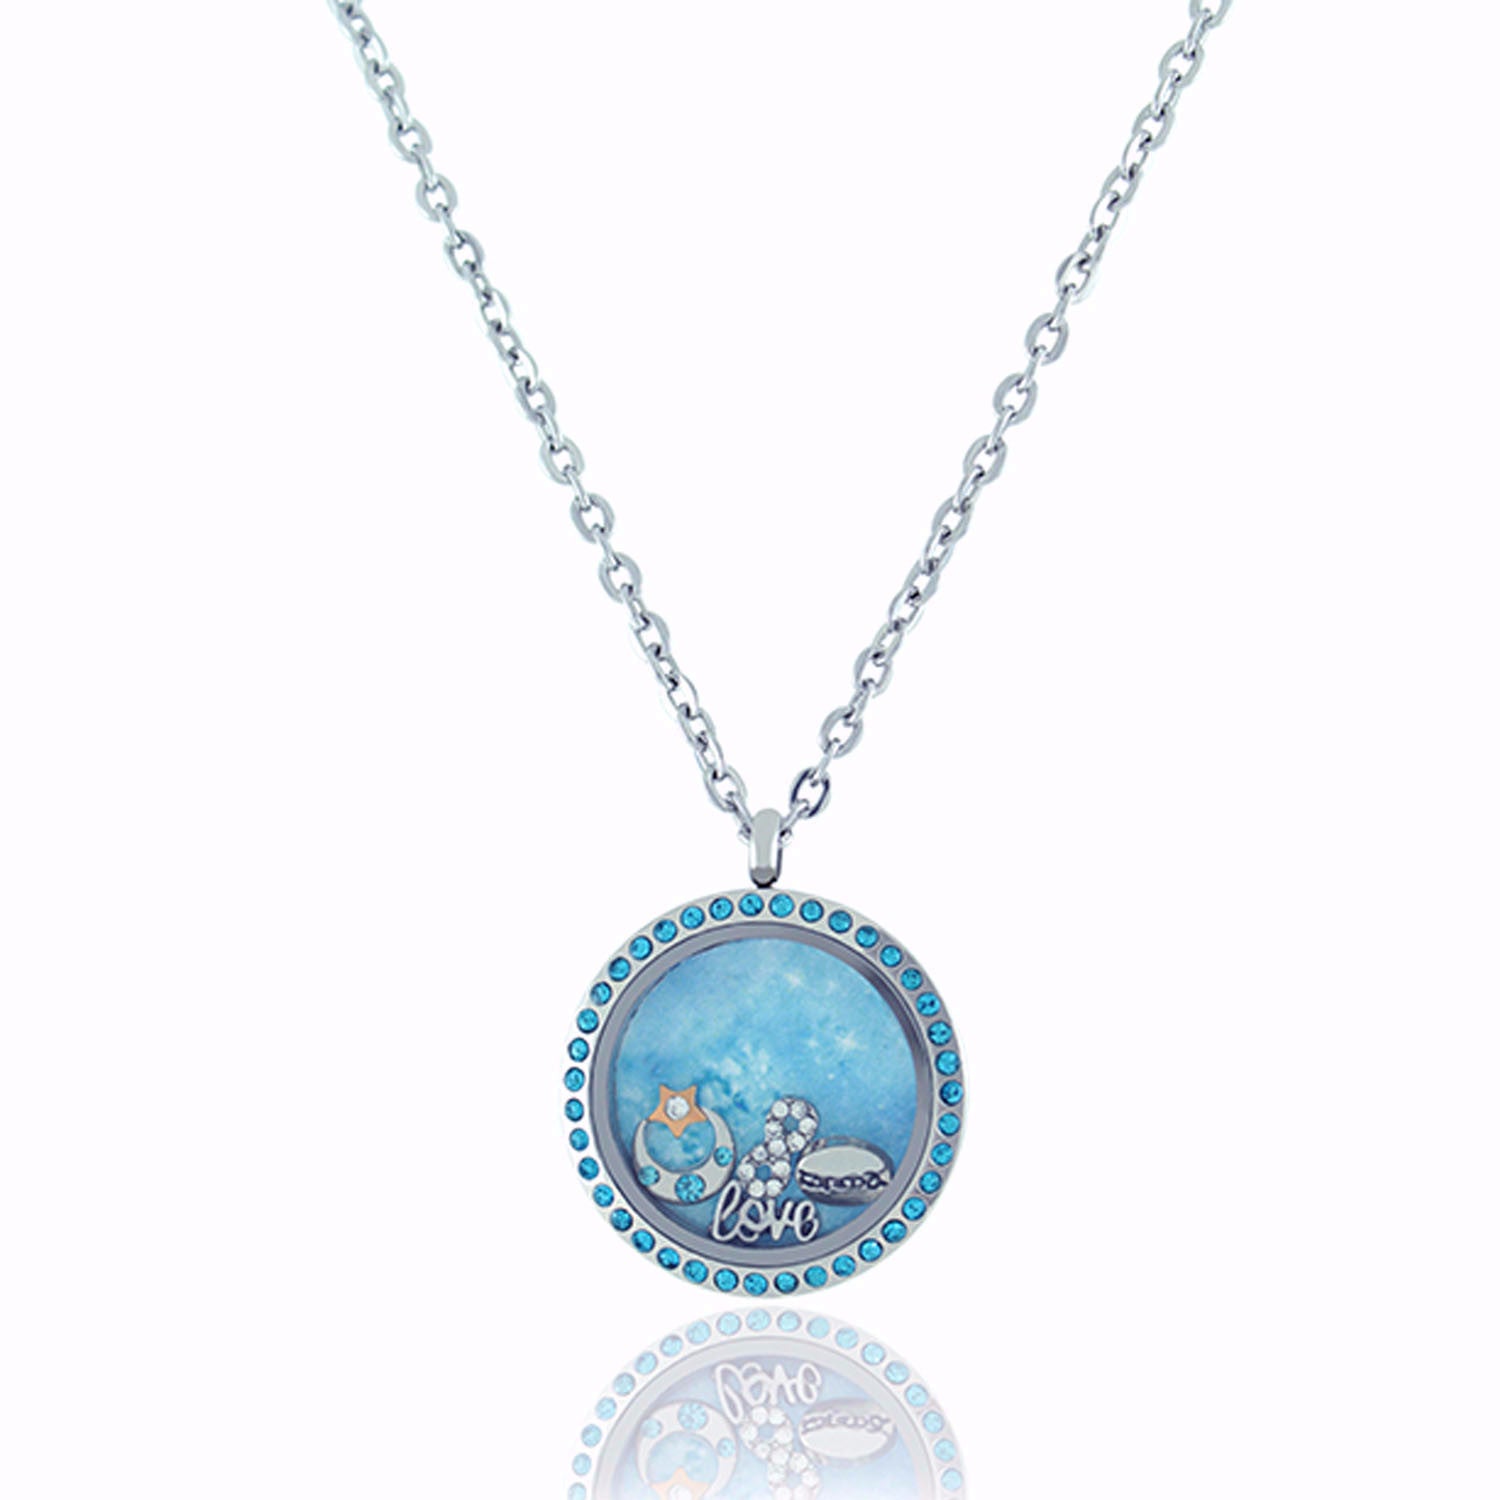 Floating Locket Necklace with Matching Chain and Choice of 6 Charms (Twist Blue Rhinestone)